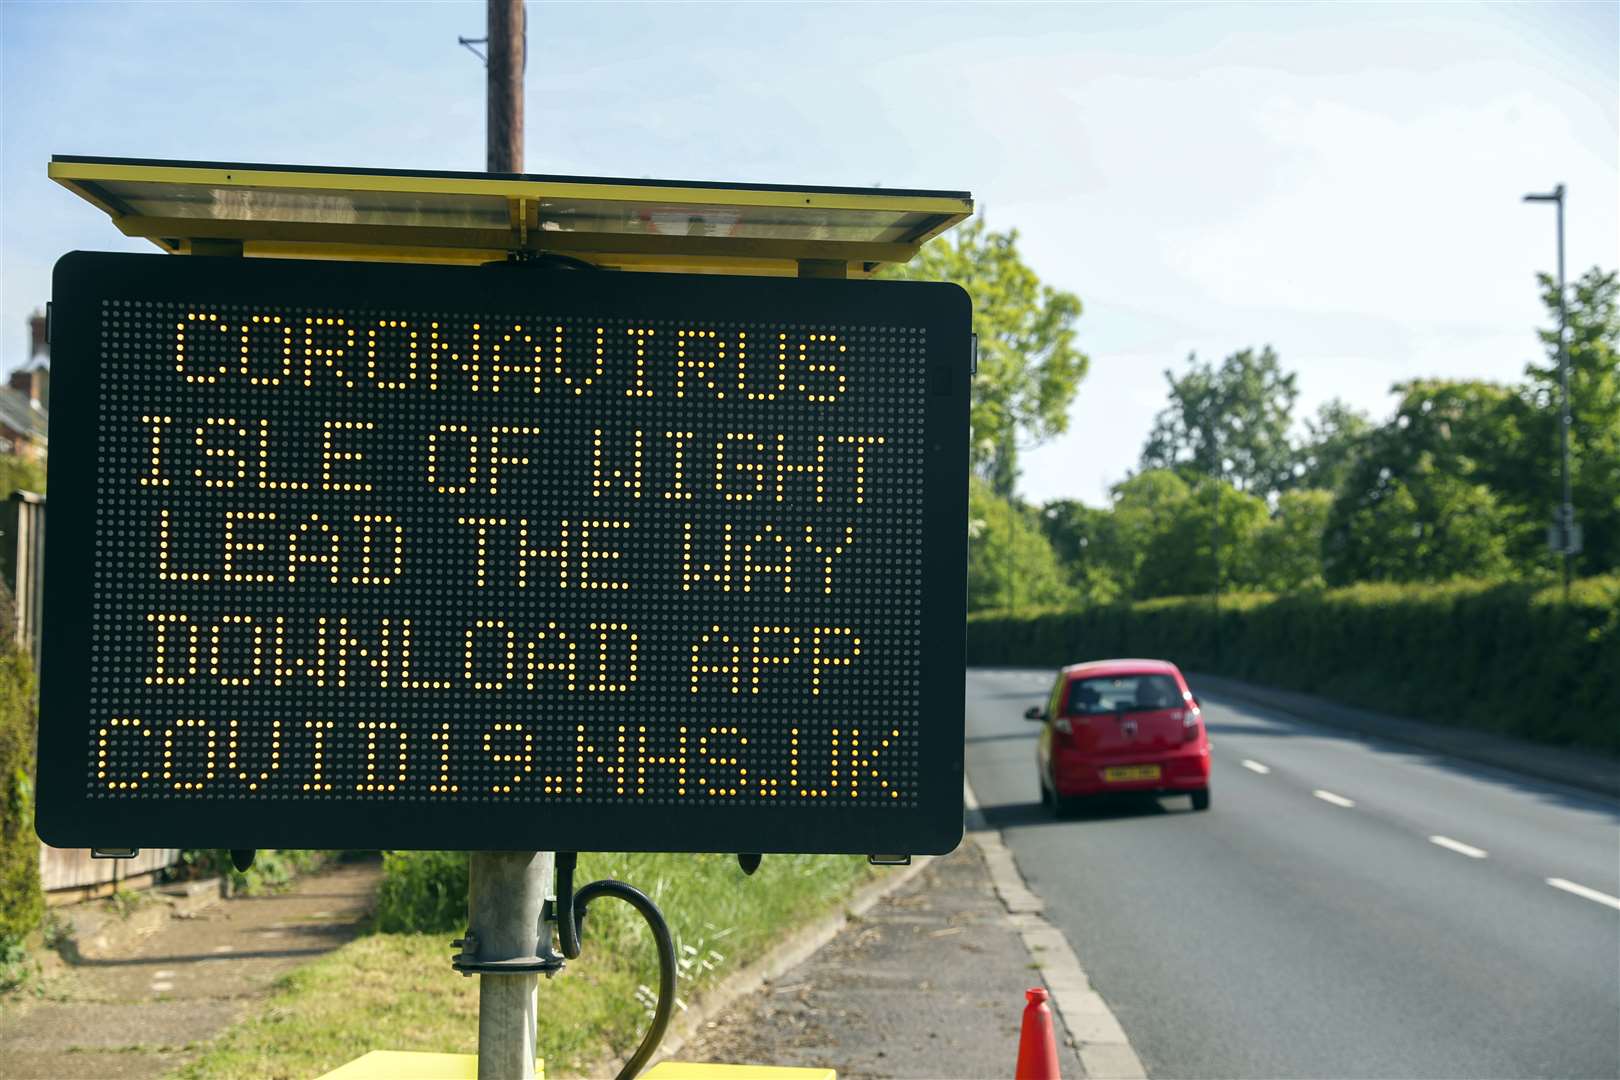 Motorists on the Isle of Wight are being told to download the NHS coronavirus contact tracing app (Steve Parsons/PA)